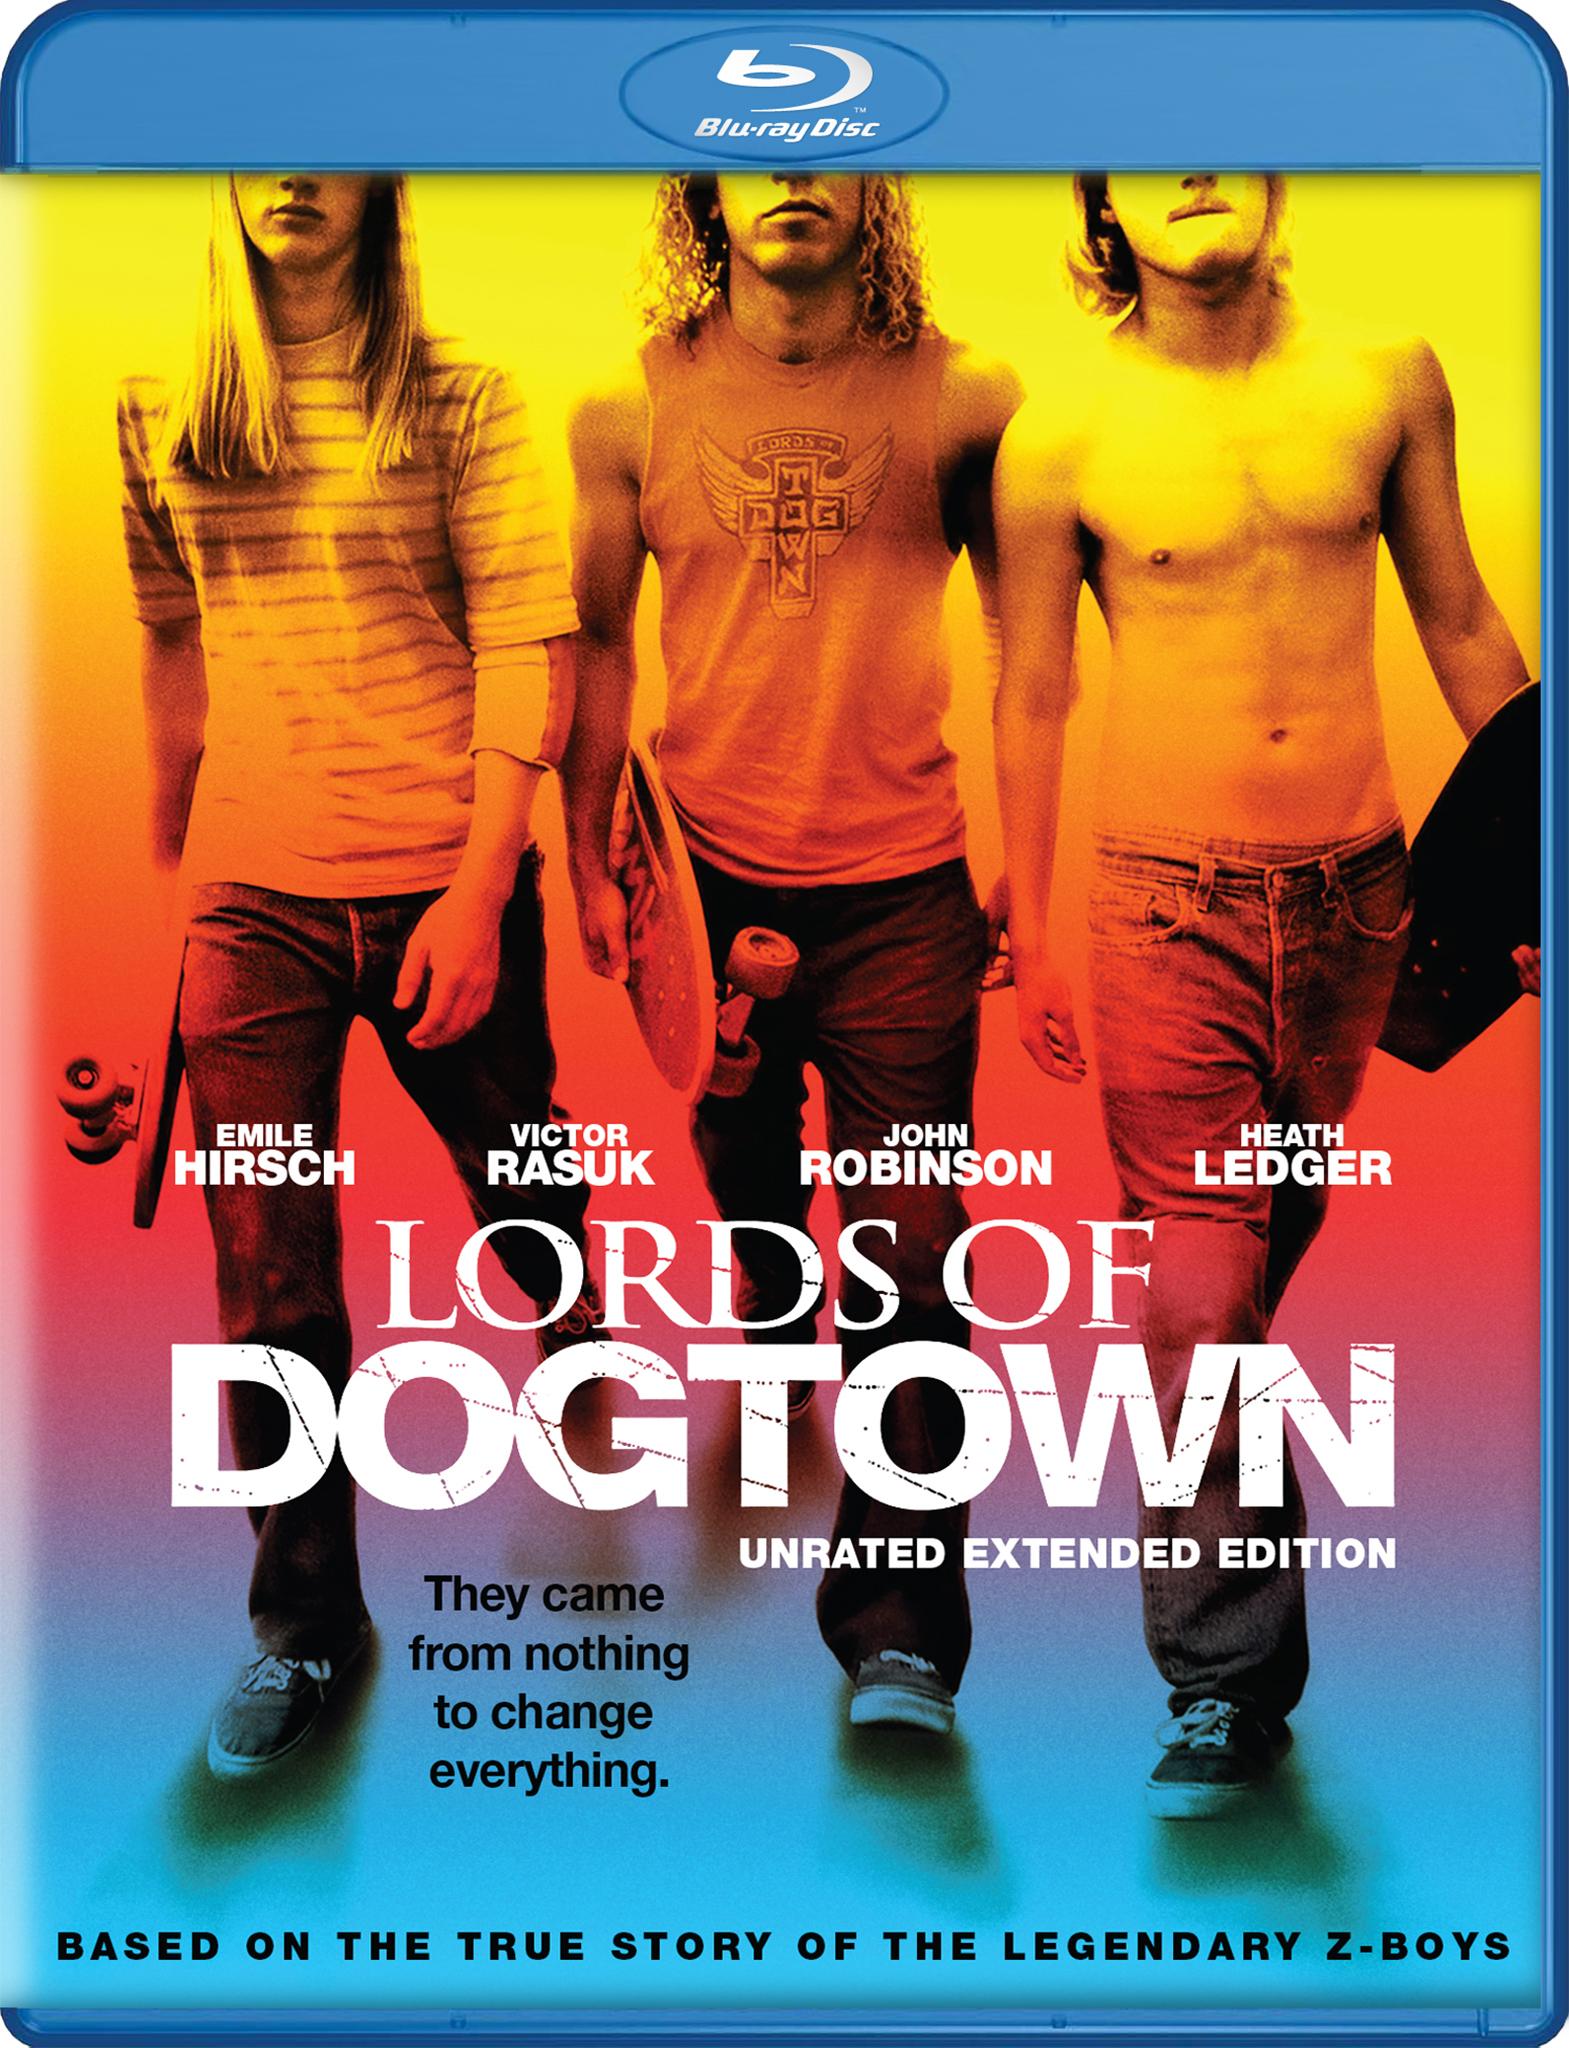 Lords of Dogtown (2005) - Skip's Troubles Scene (4/10)